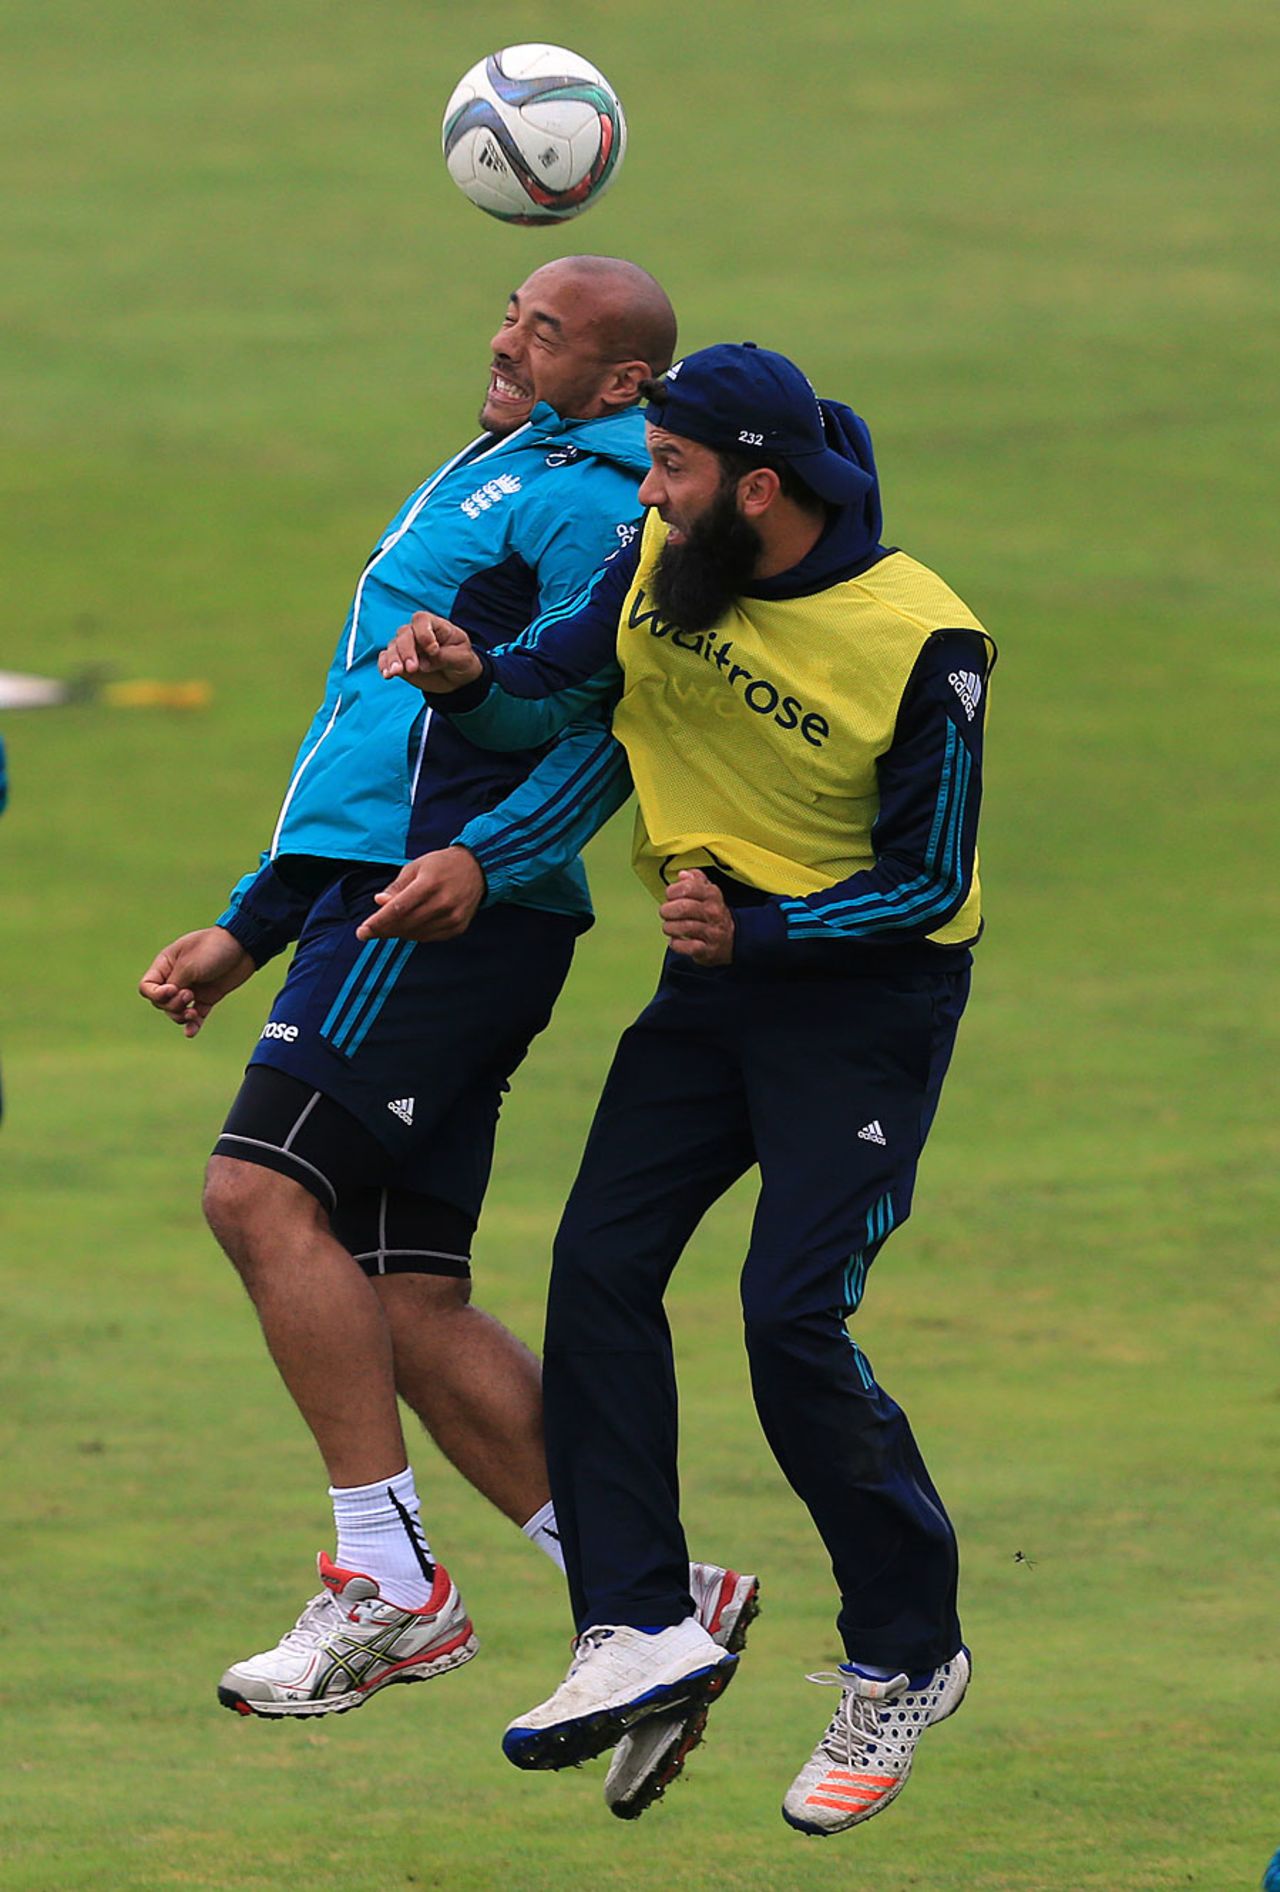 Tymal Mills, who is part of the T20 squad, trained with the one-day team, Cardiff, September 3, 2016